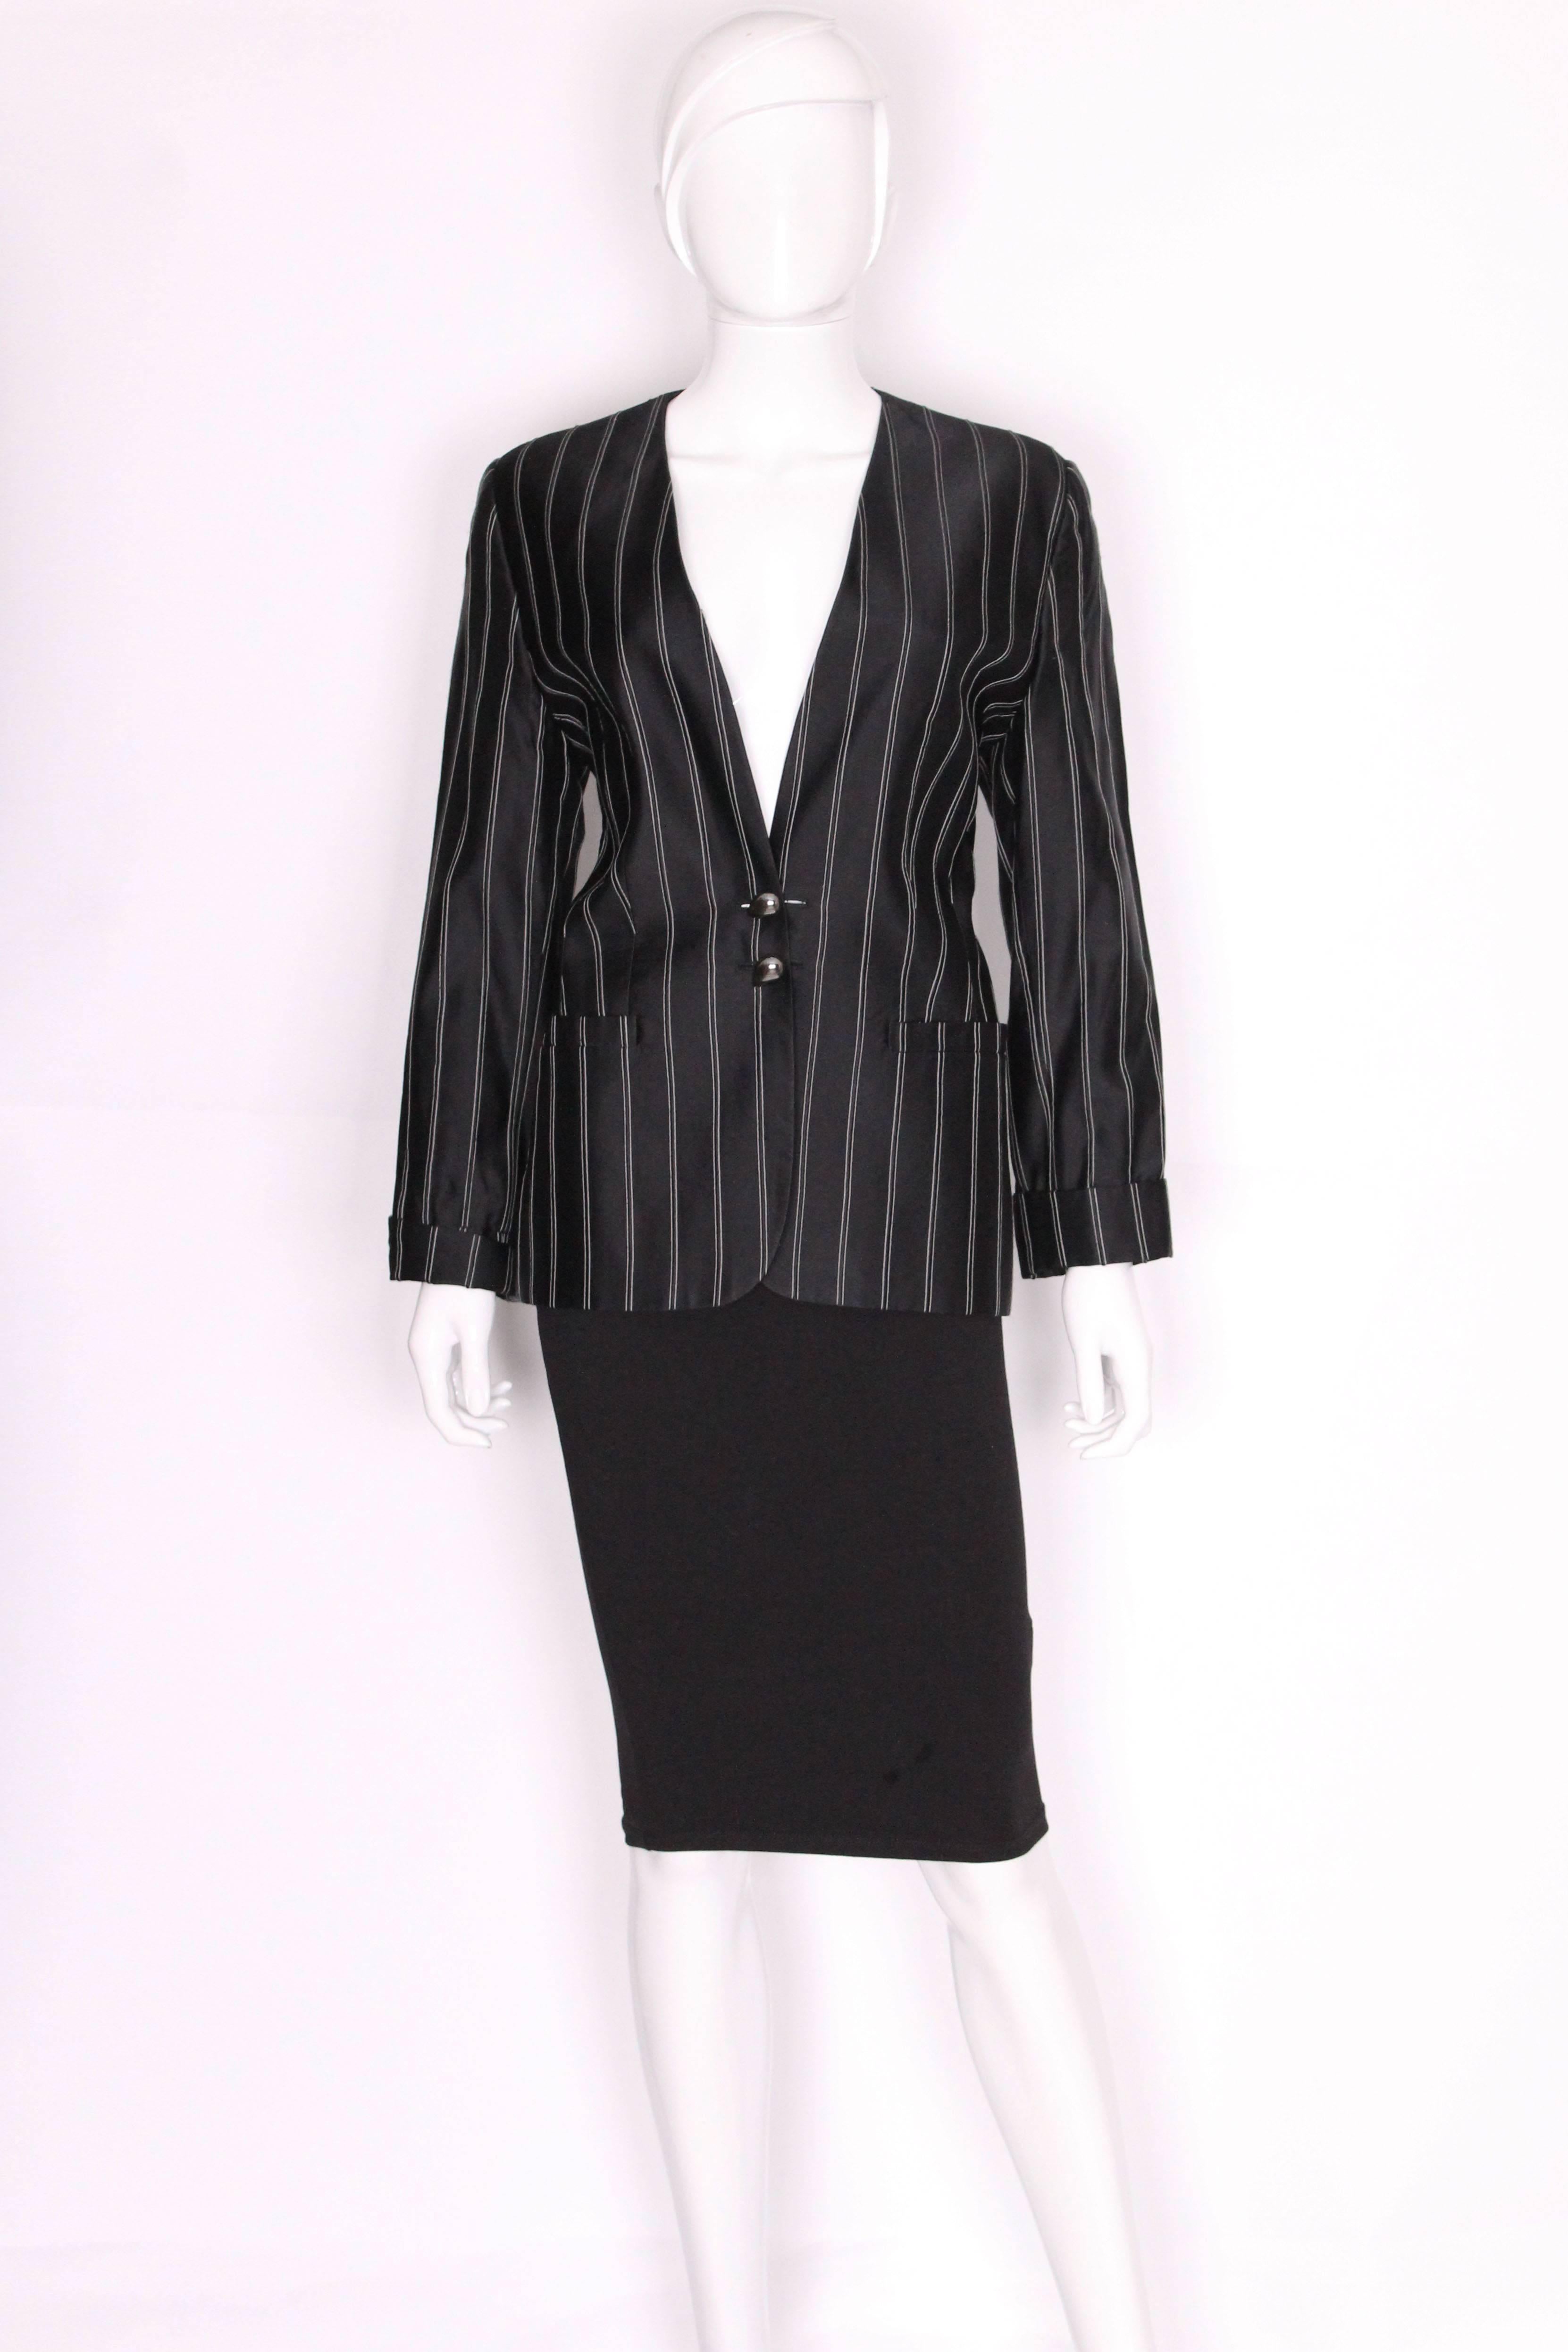 A chic jacket by Gucci. The jacket is made of a black silk mix fabric with white double stripes.It is collarless and has a deep v neckline.It has turn up cuffs, pockets at waist level and a two button fastening.